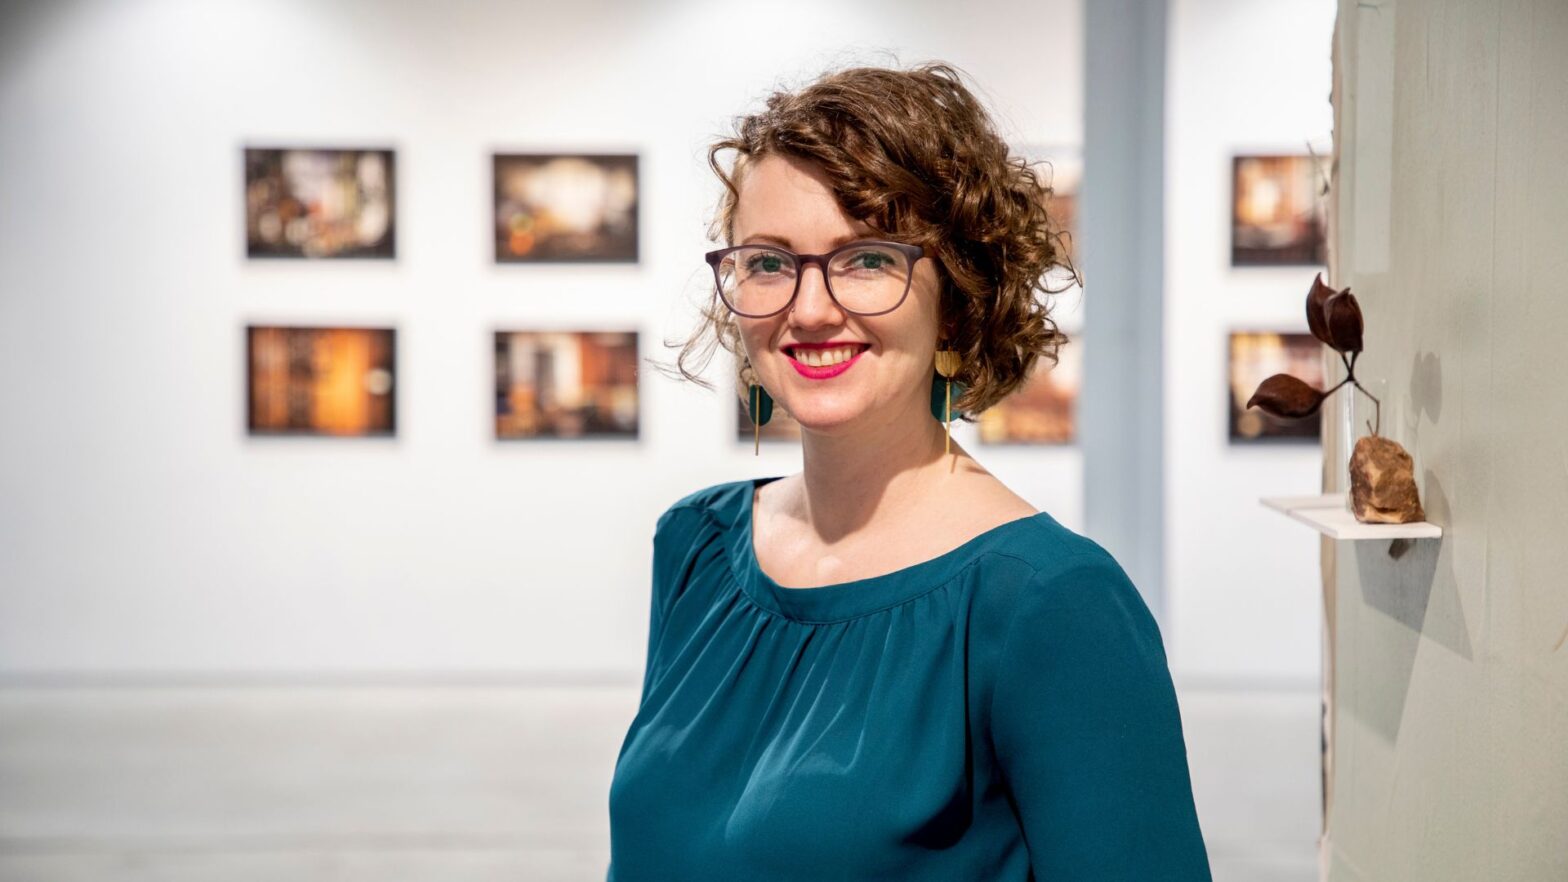 Jessica Page featured artist in a gallery